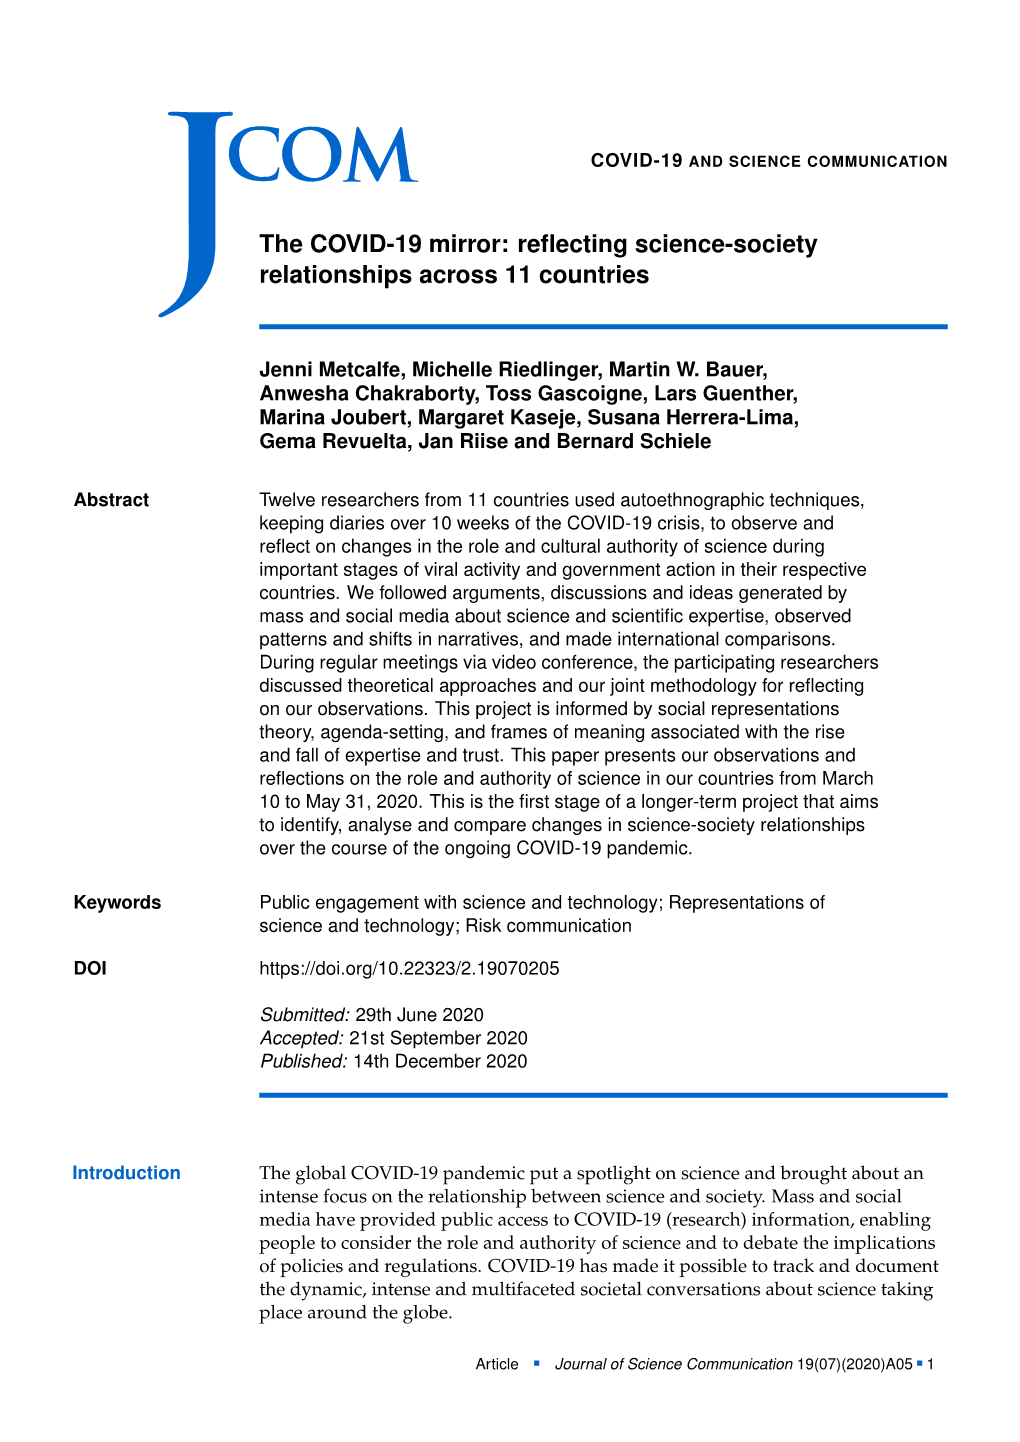 The COVID-19 Mirror: Reﬂecting Science-Society J Relationships Across 11 Countries